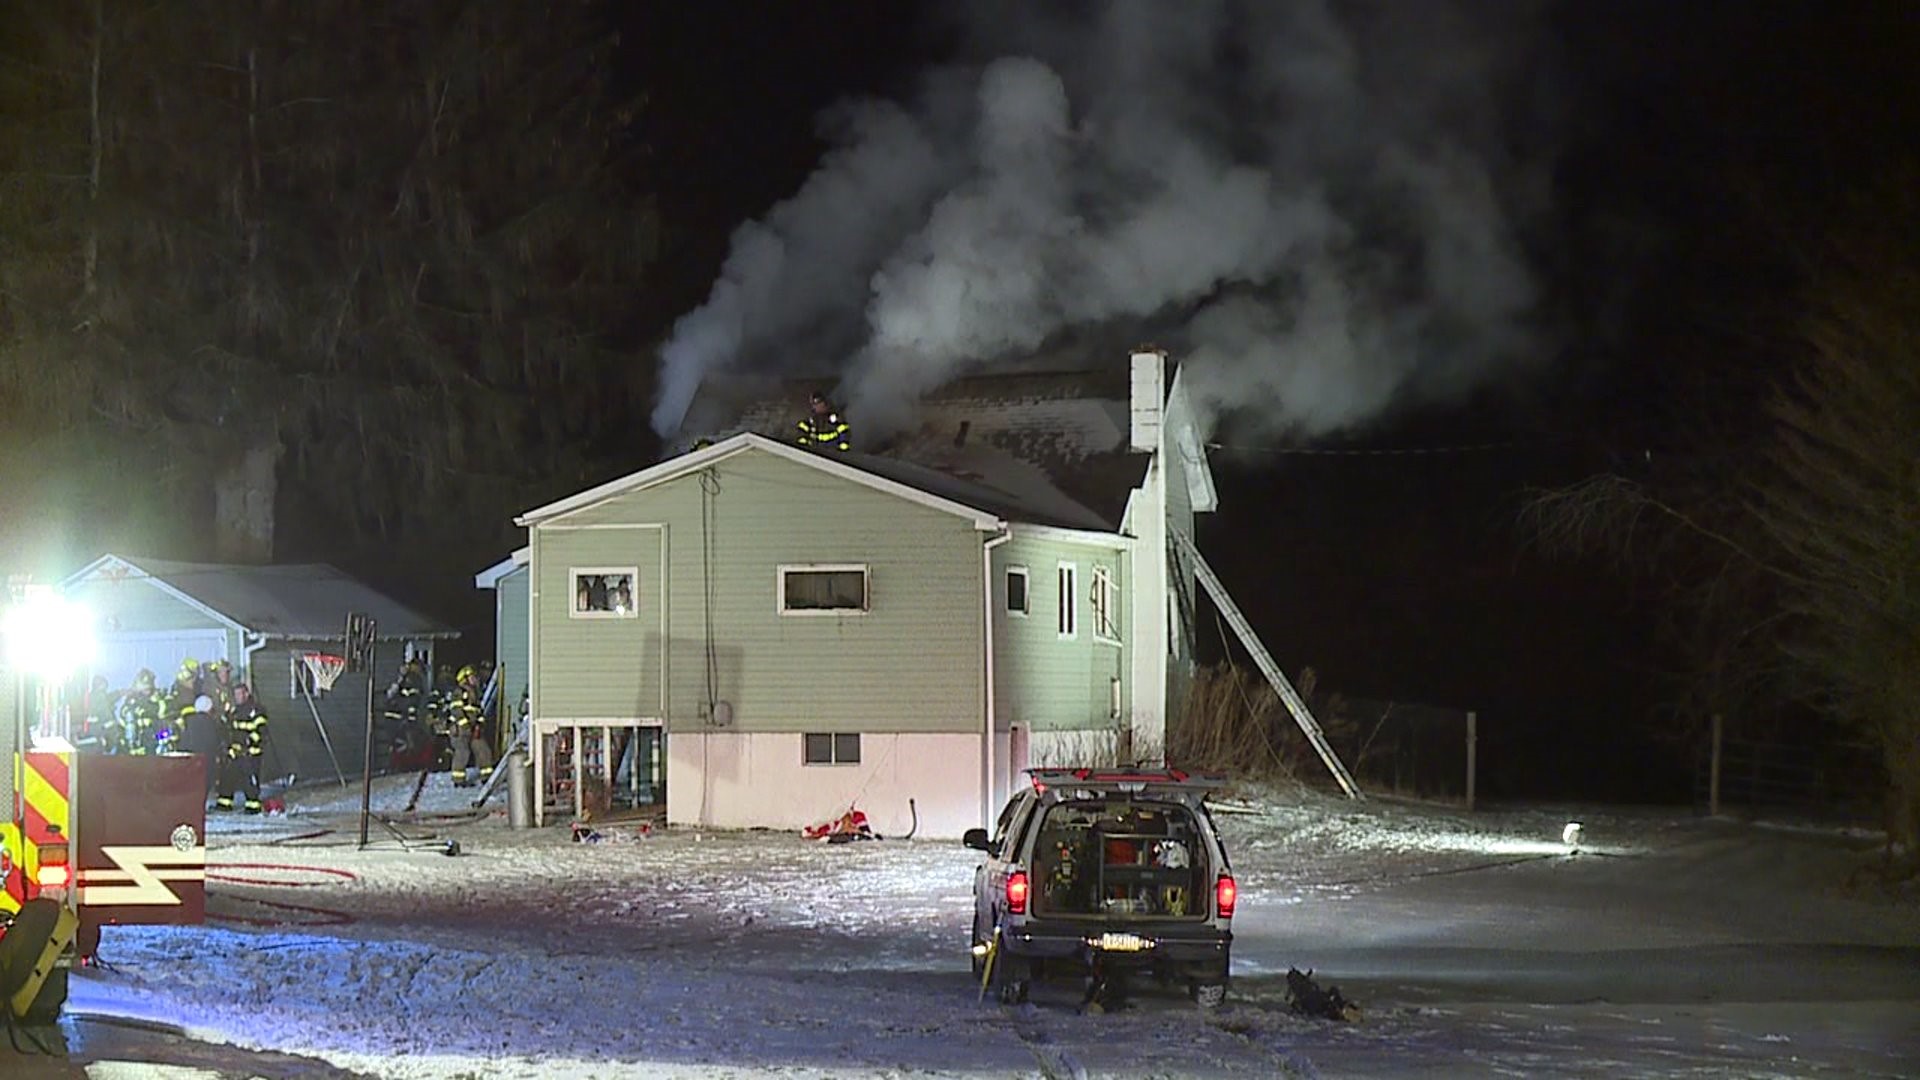 Cats Killed in Susquehanna County Fire